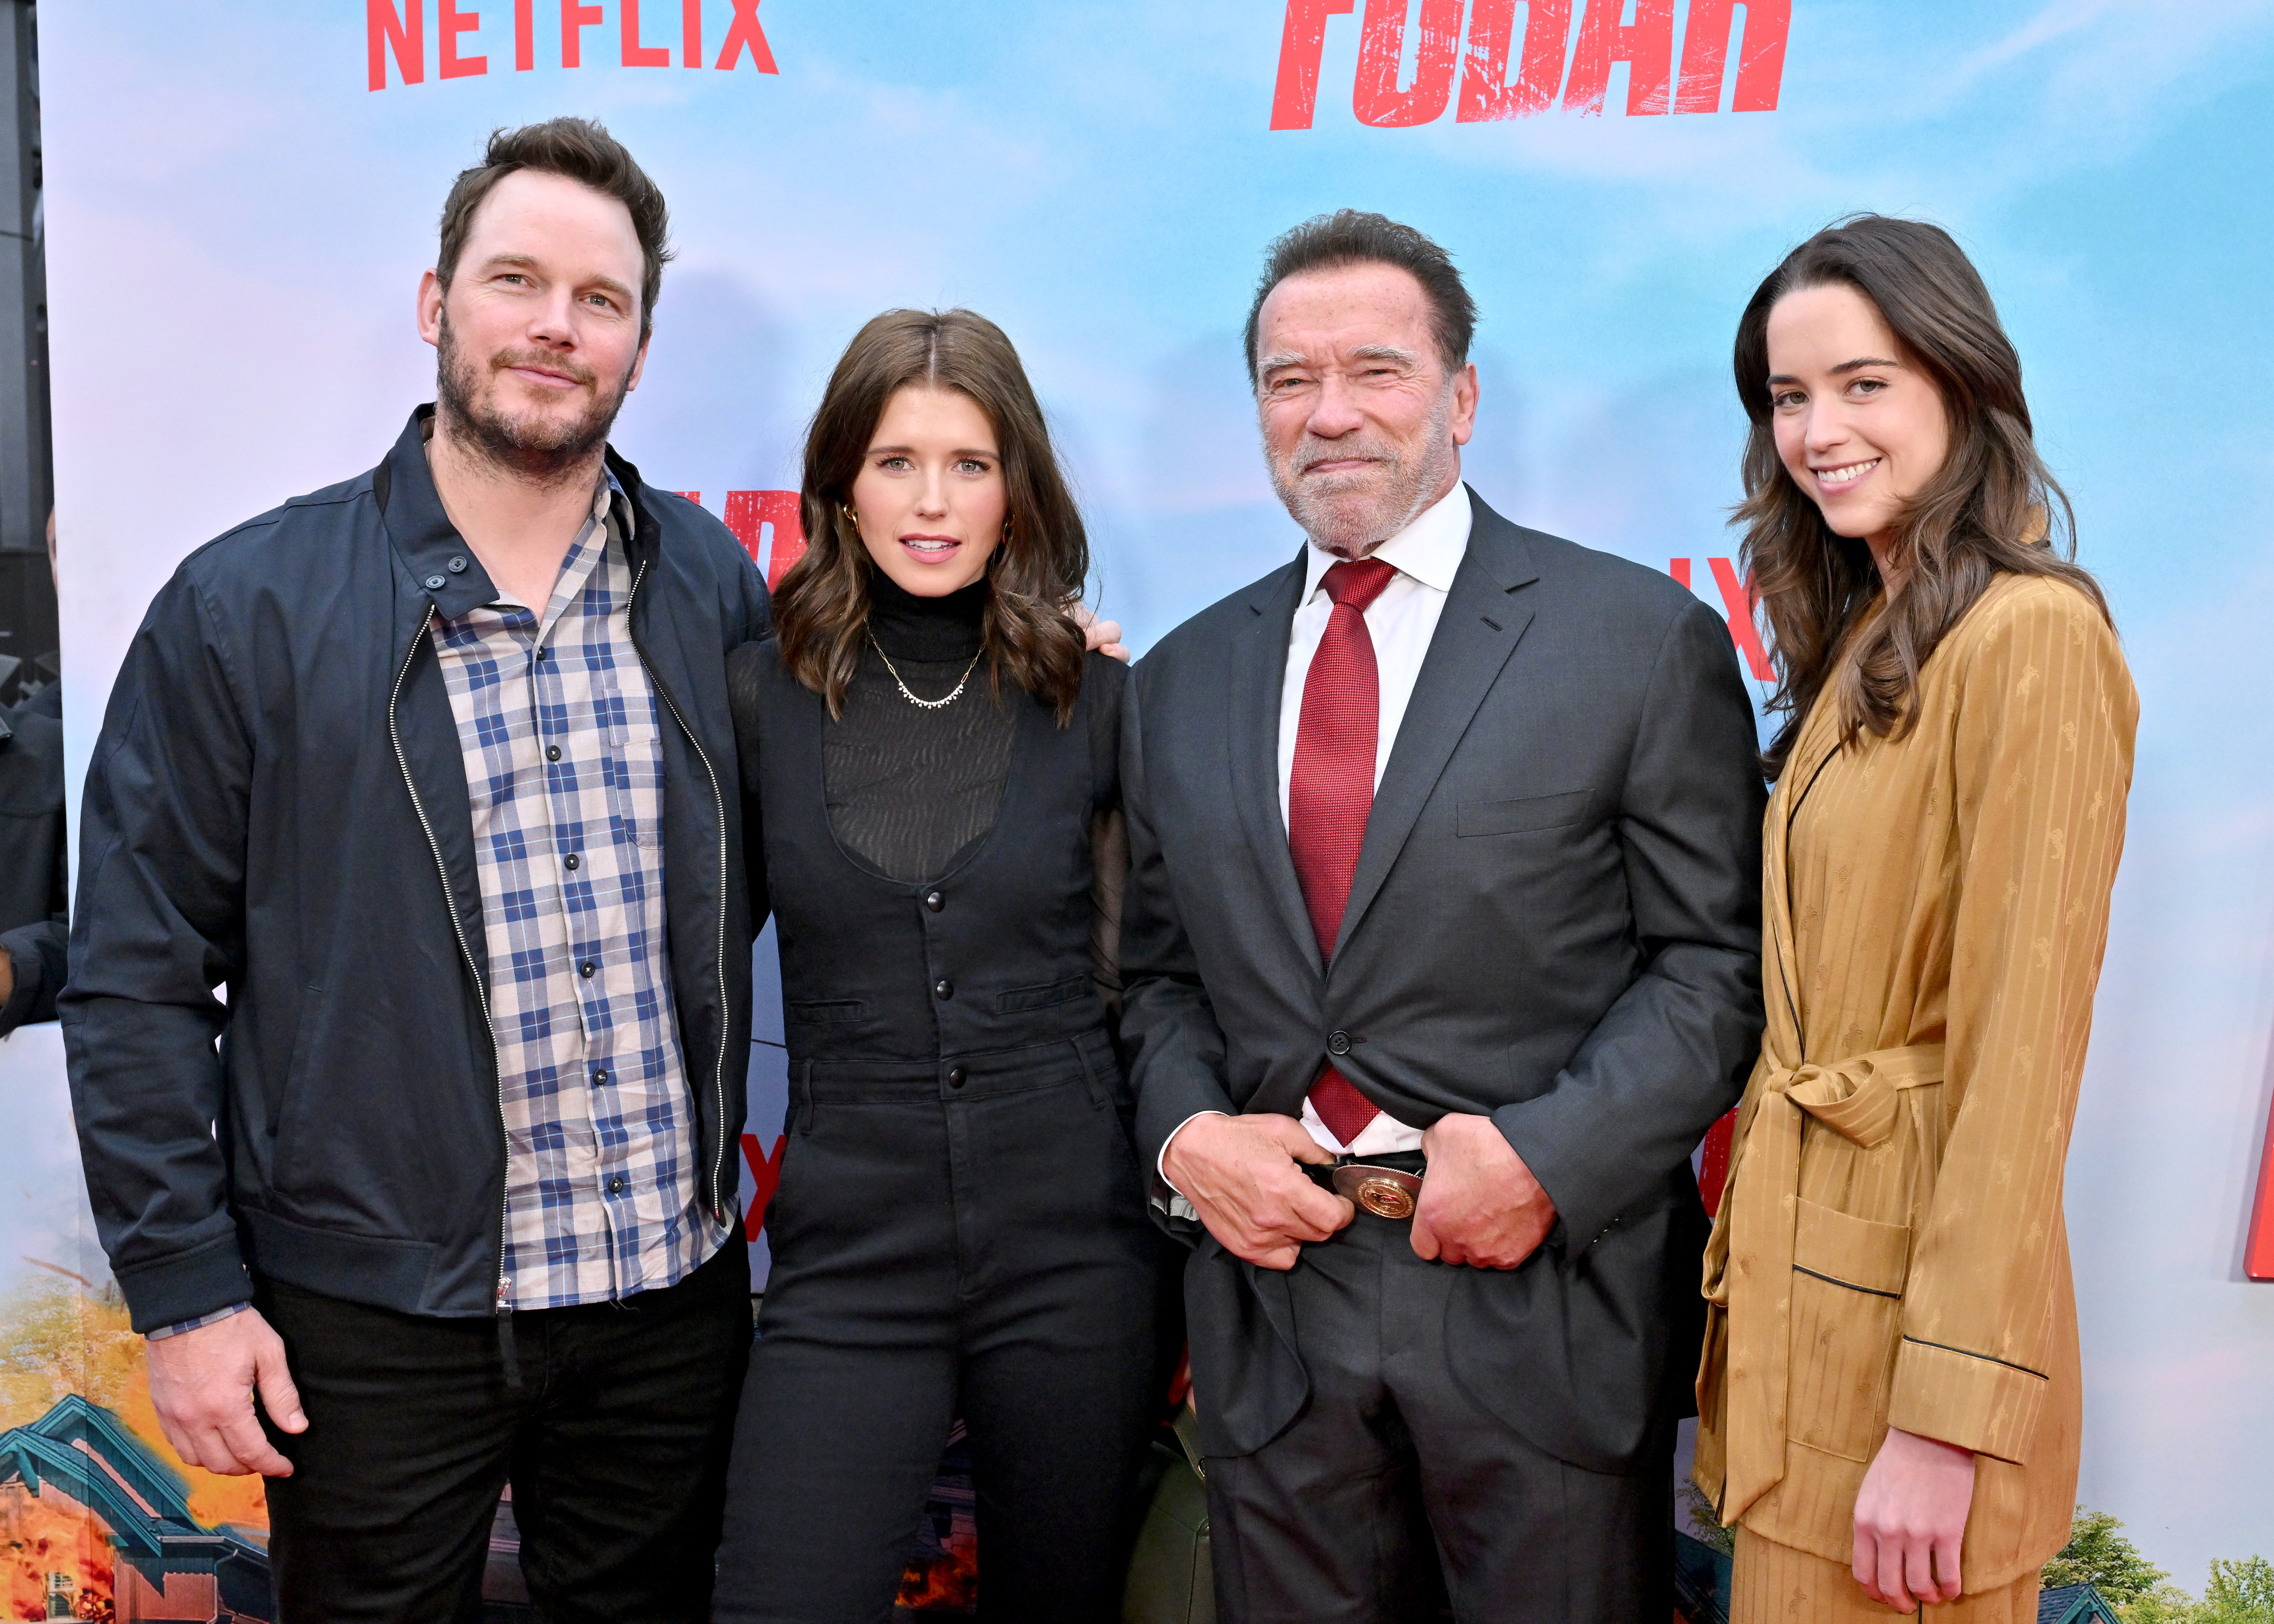 Chris Pratt, and Katherine, Arnold, and Christina Schwarzenegger at the Los Angeles premiere of Netflix's "FUBAR" on May 22, 2023, in Los Angeles, California | Source: Getty Images